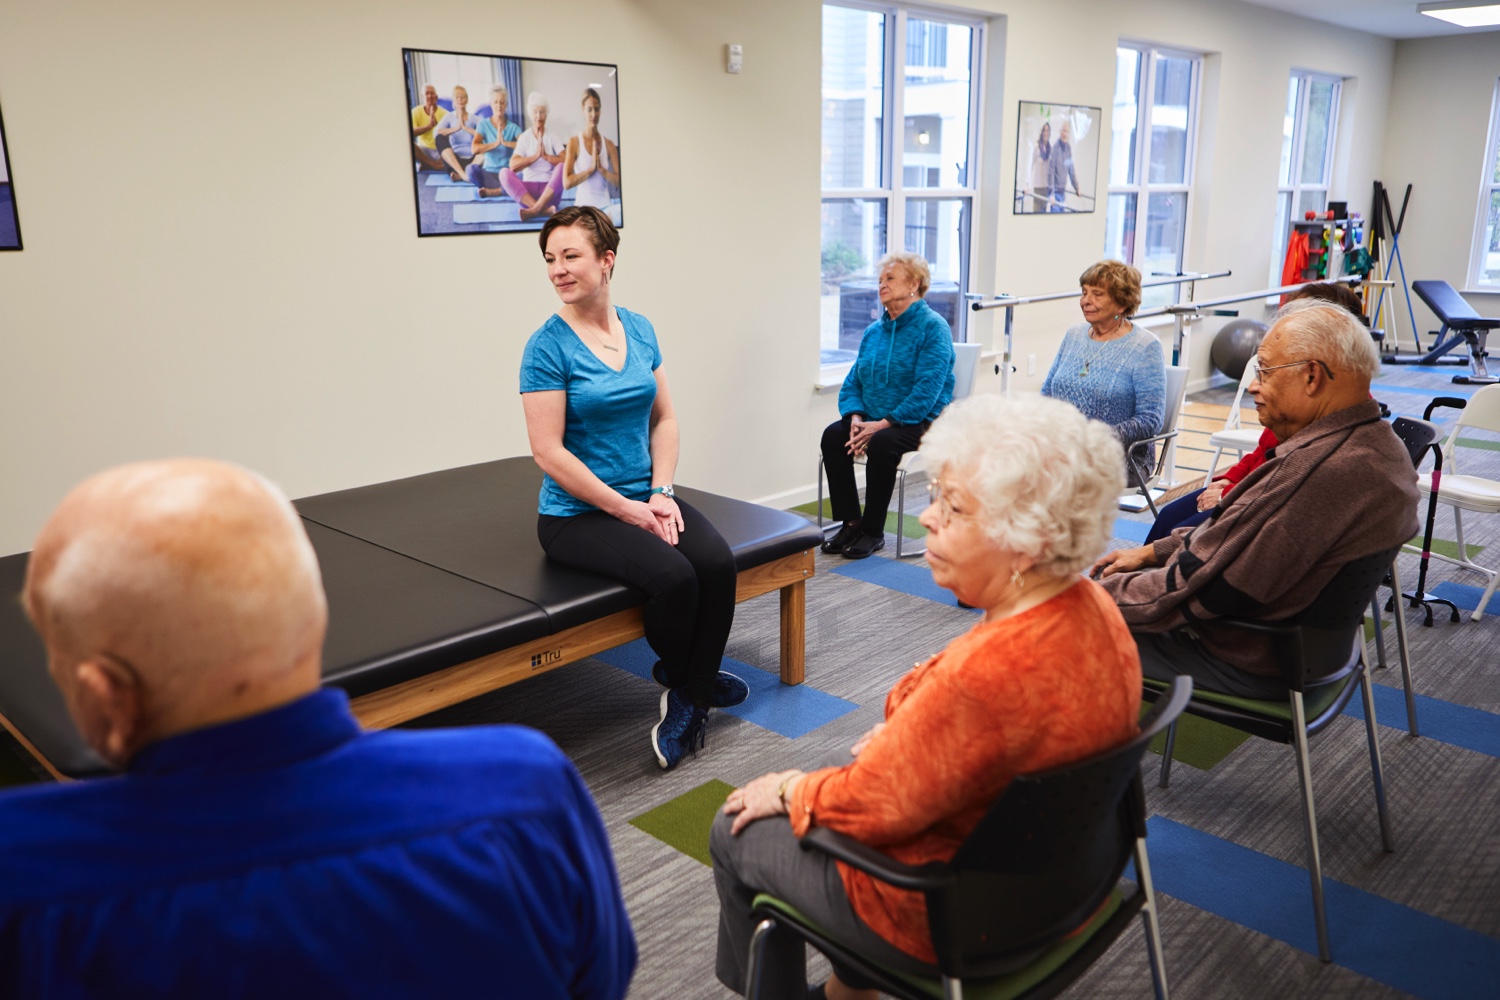 A group of seniors participating in a seated wellness class, following the guidance of a team member